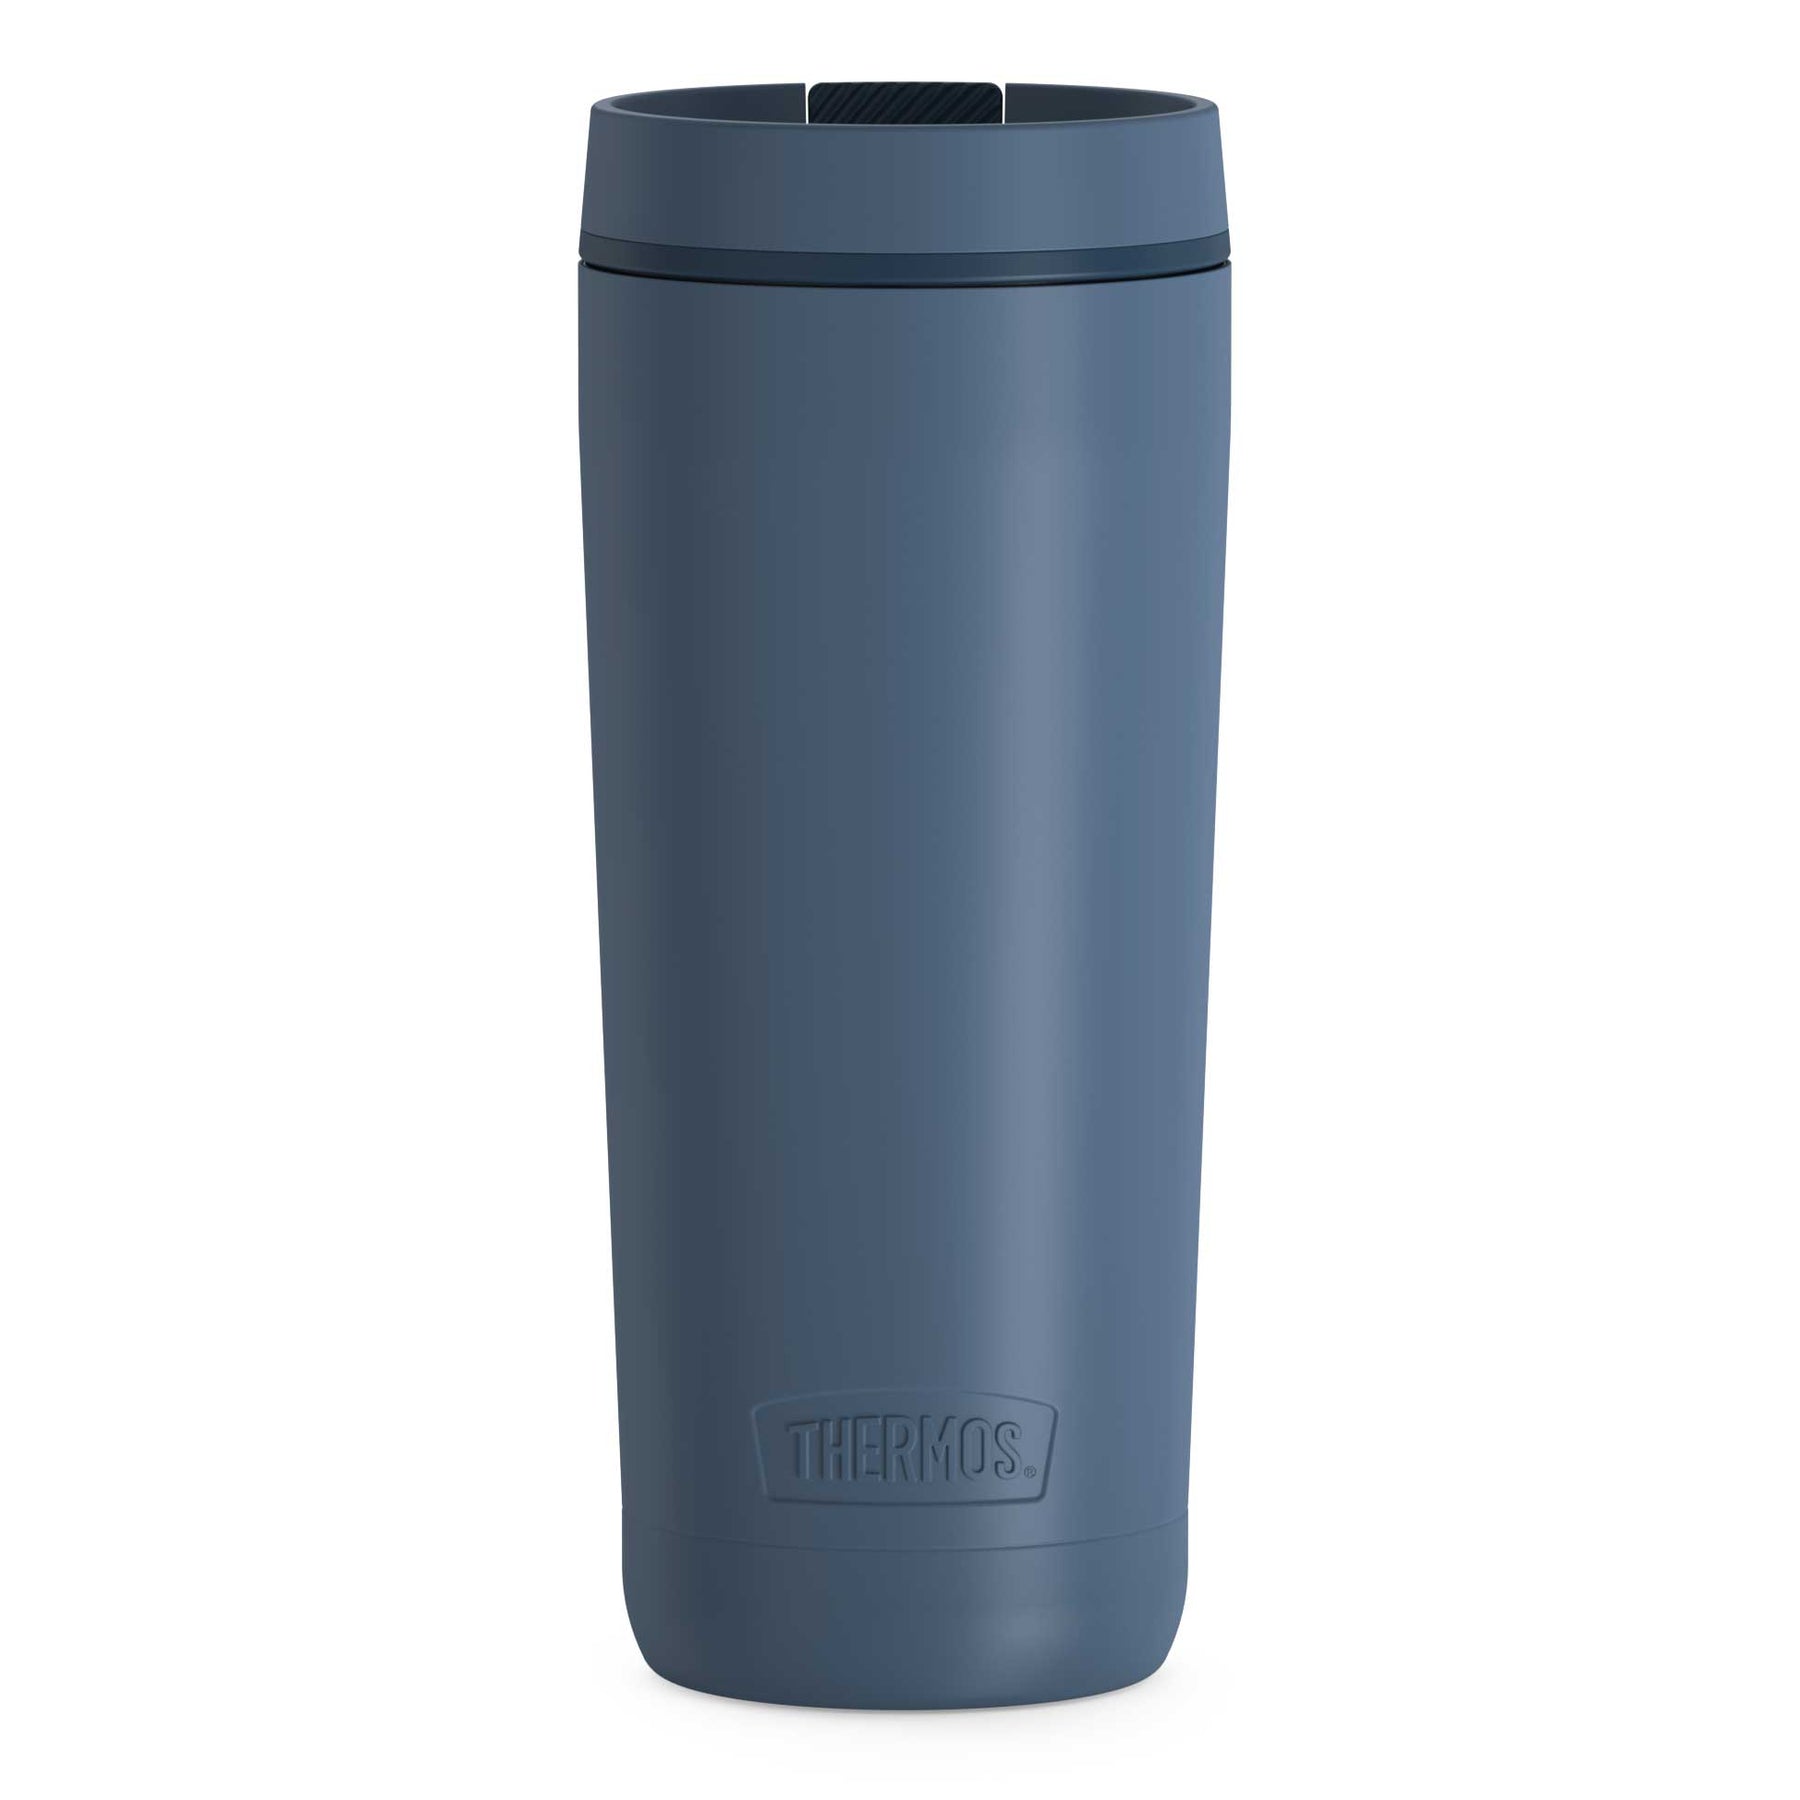 Thermos Stainless Steel 18oz Vacuum Insulated Travel Tumbler 2